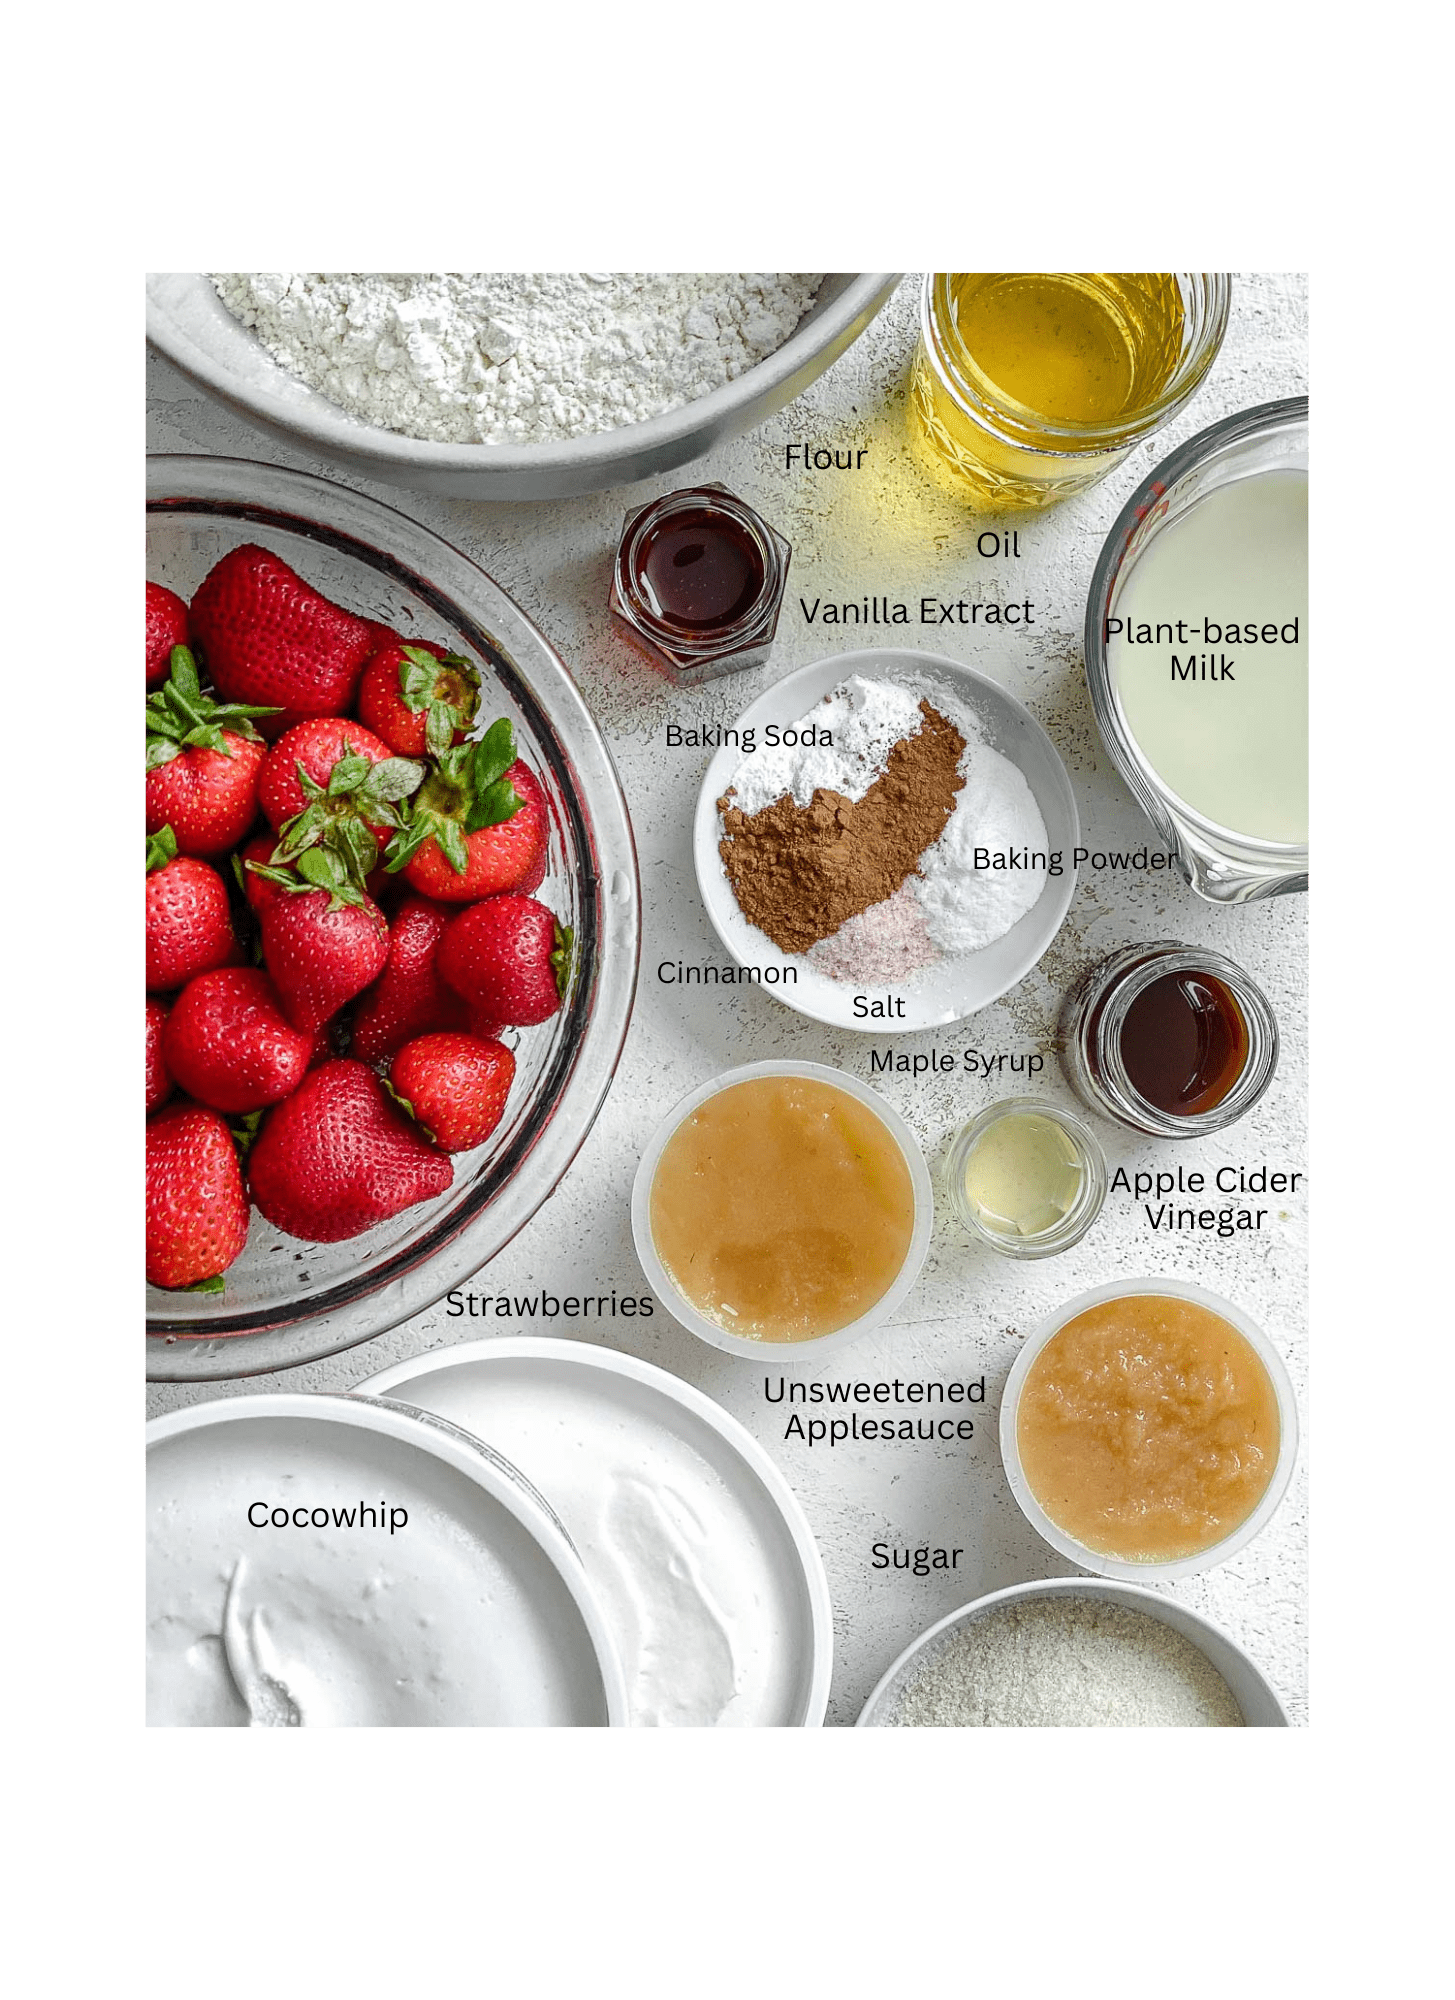 ingredients for Vegan Strawberry Shortcake against a white background